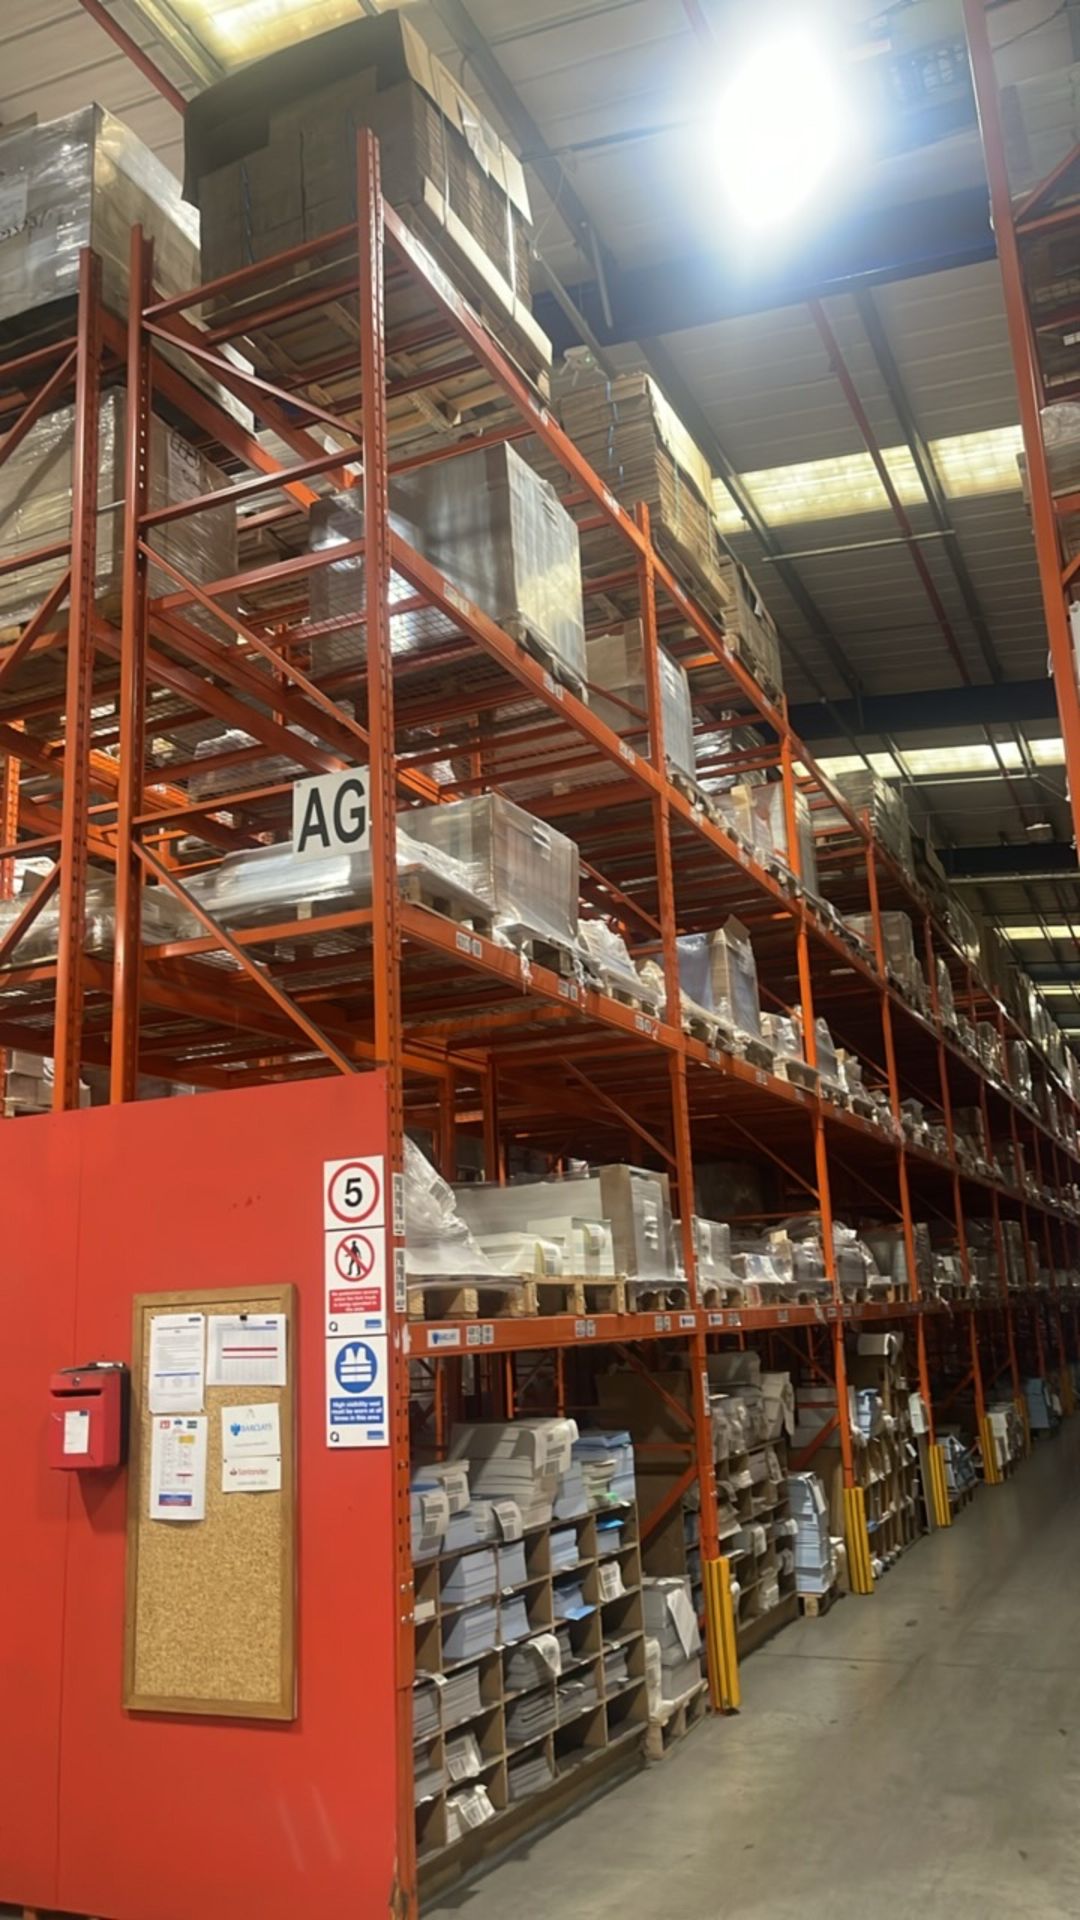 ref 3 - 23 Bays Of Boltless Pallet Racking - Image 8 of 9